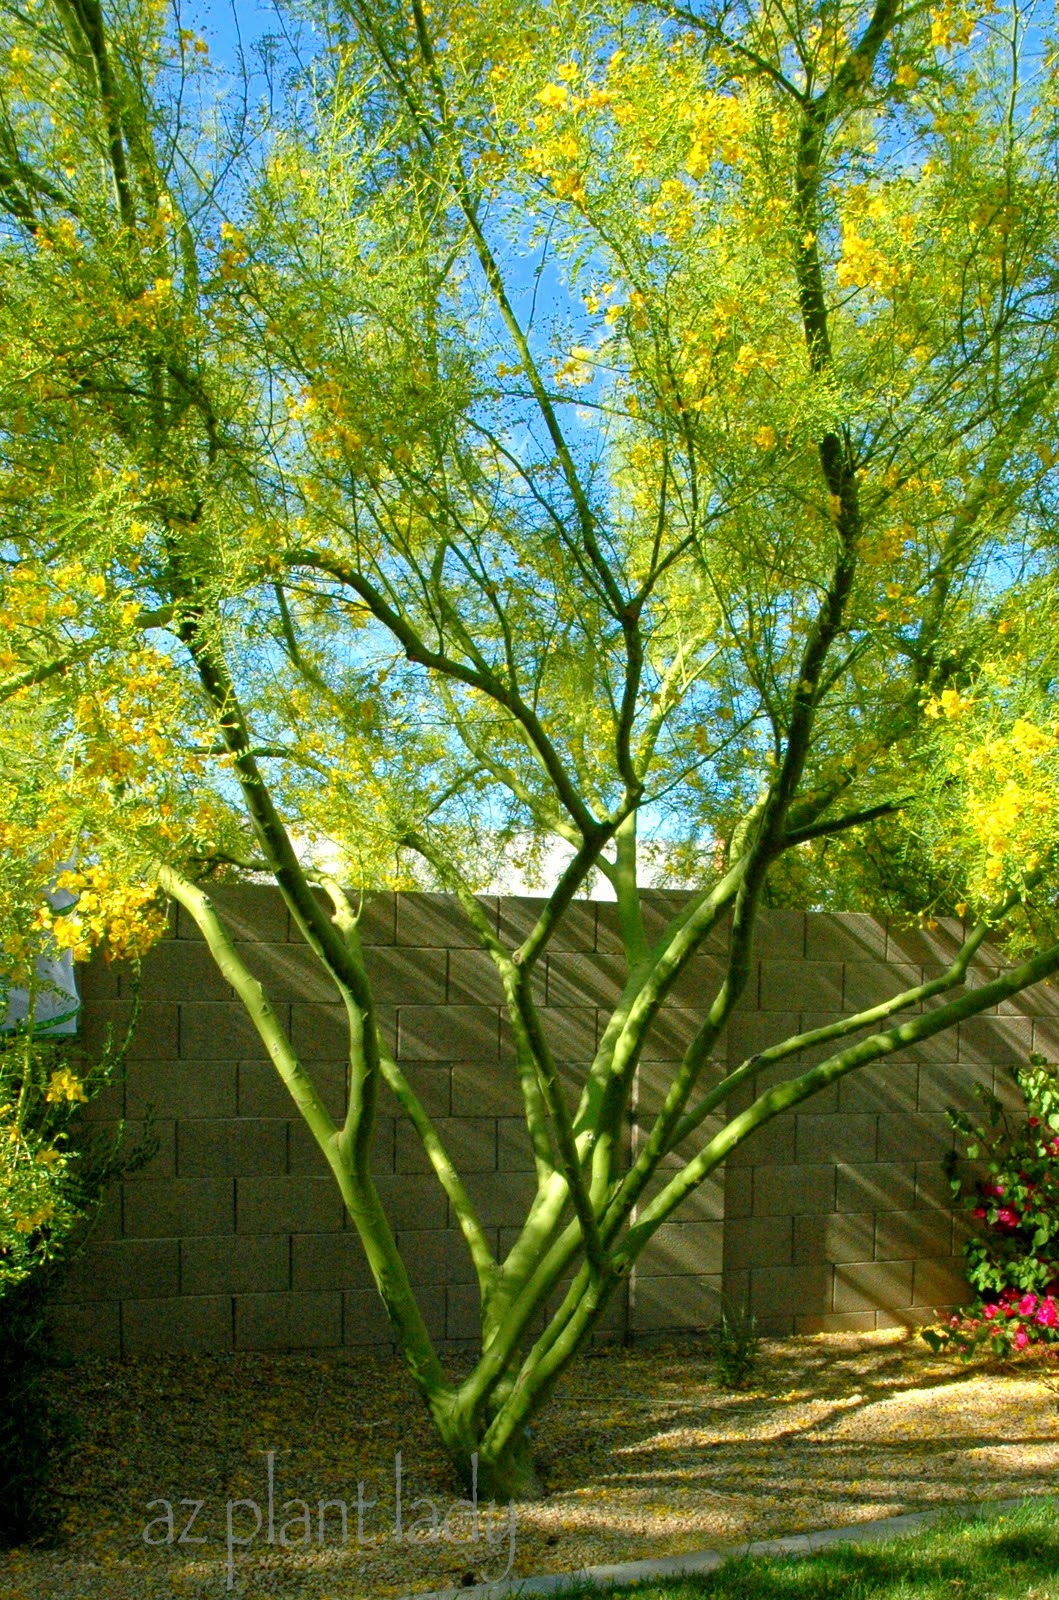 A Palo Verde Tree That Rises Above the Rest - Ramblings ...